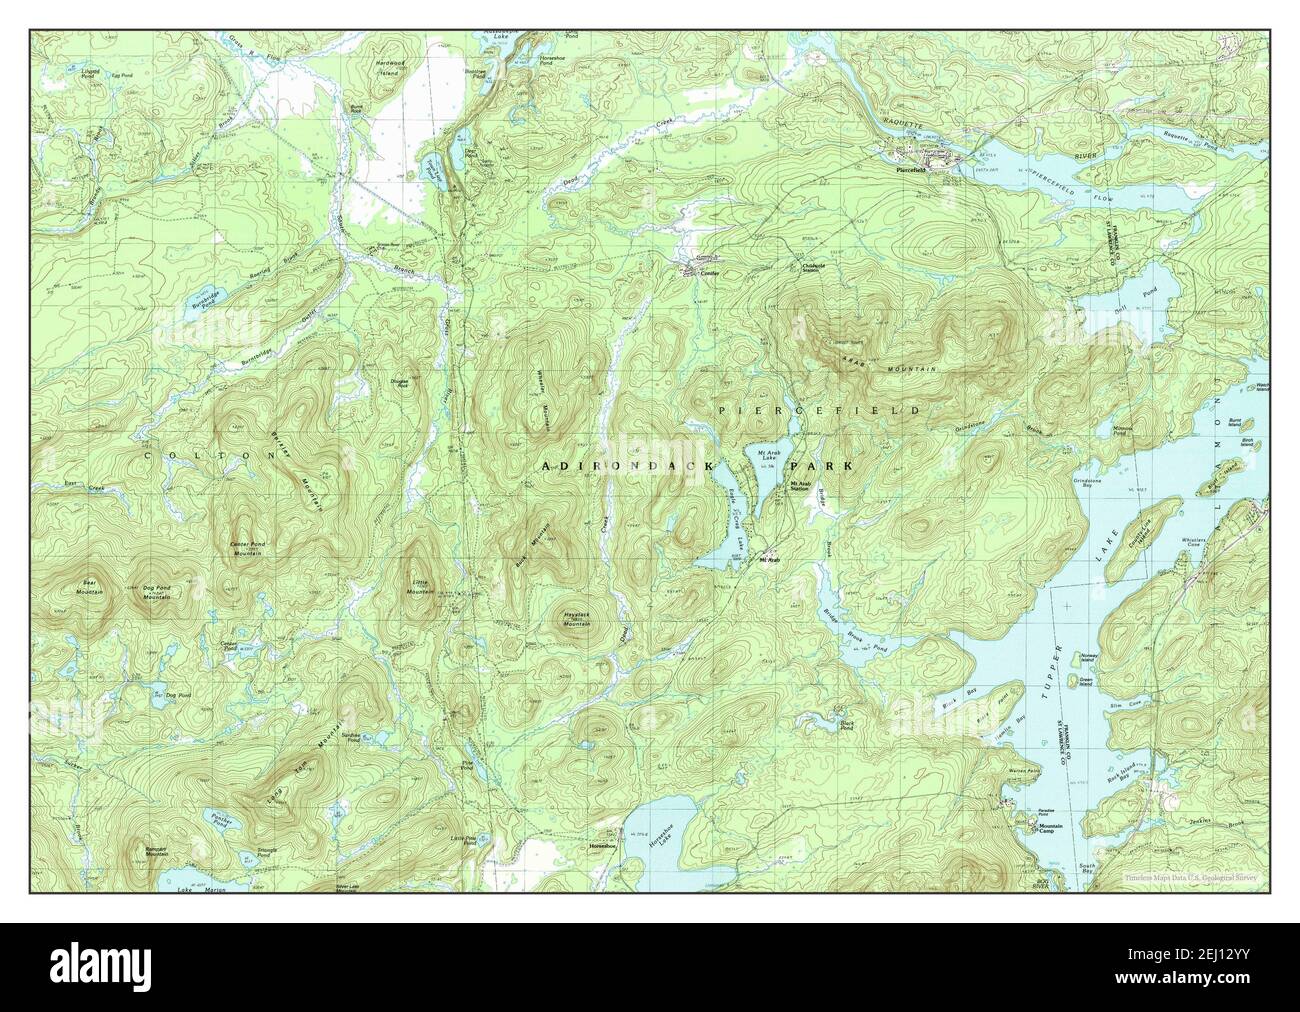 Piercefield, New York, map 1990, 1:25000, United States of America by Timeless Maps, data U.S. Geological Survey Stock Photo